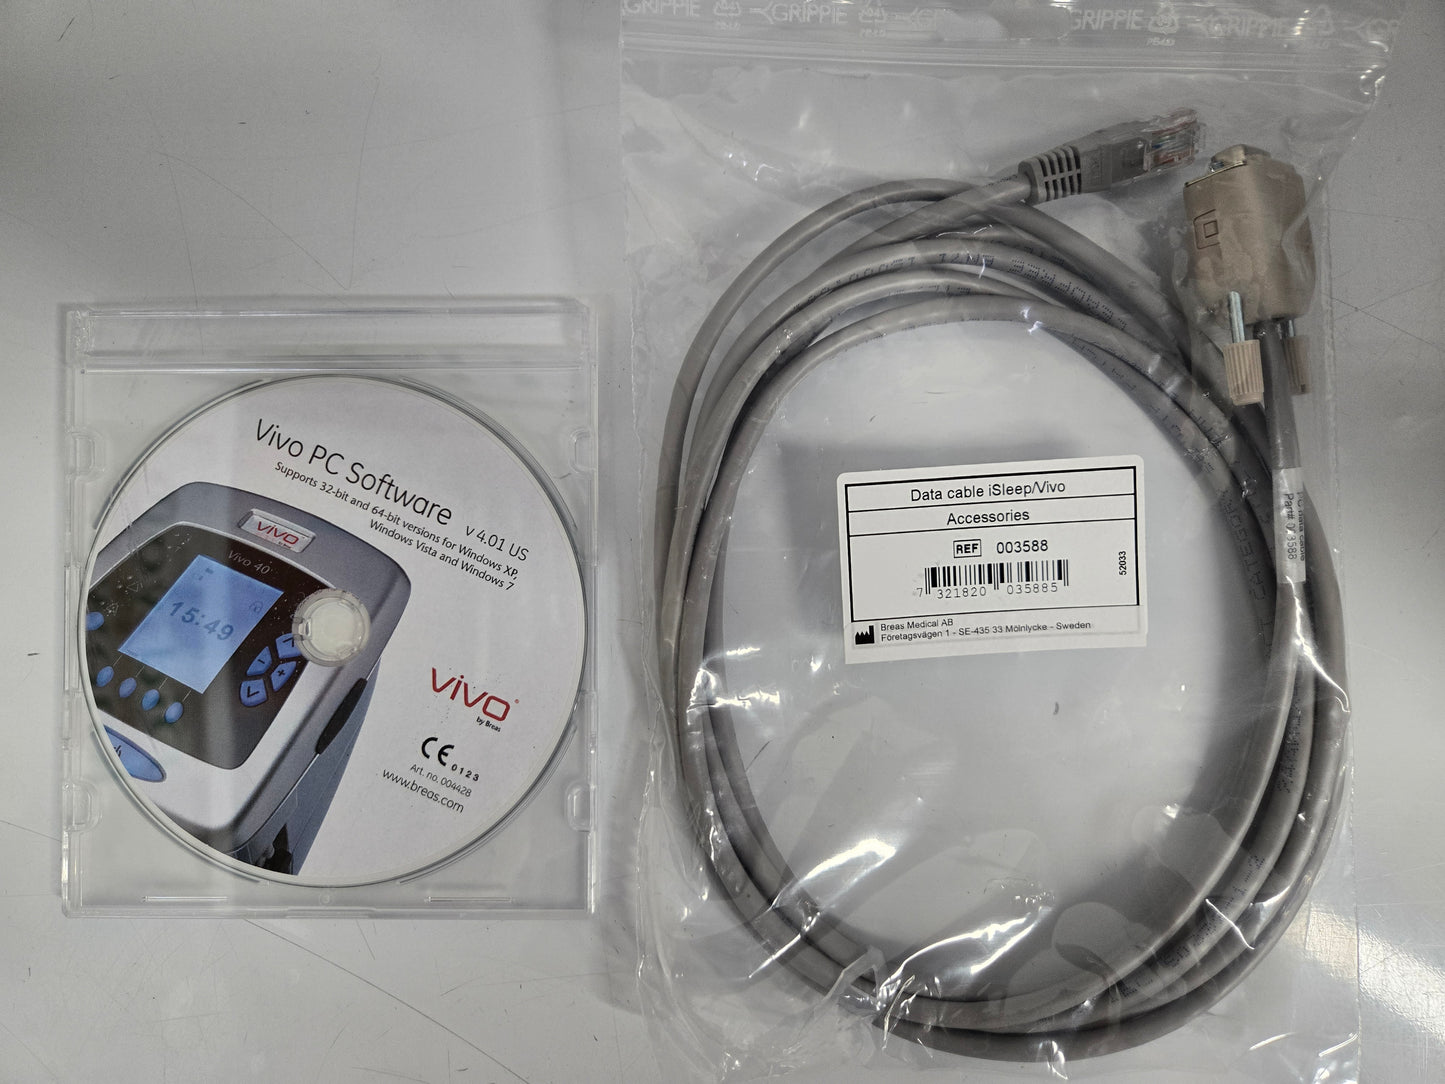 NEW Breas HDM PC Software Kit for the Vivo 30/40